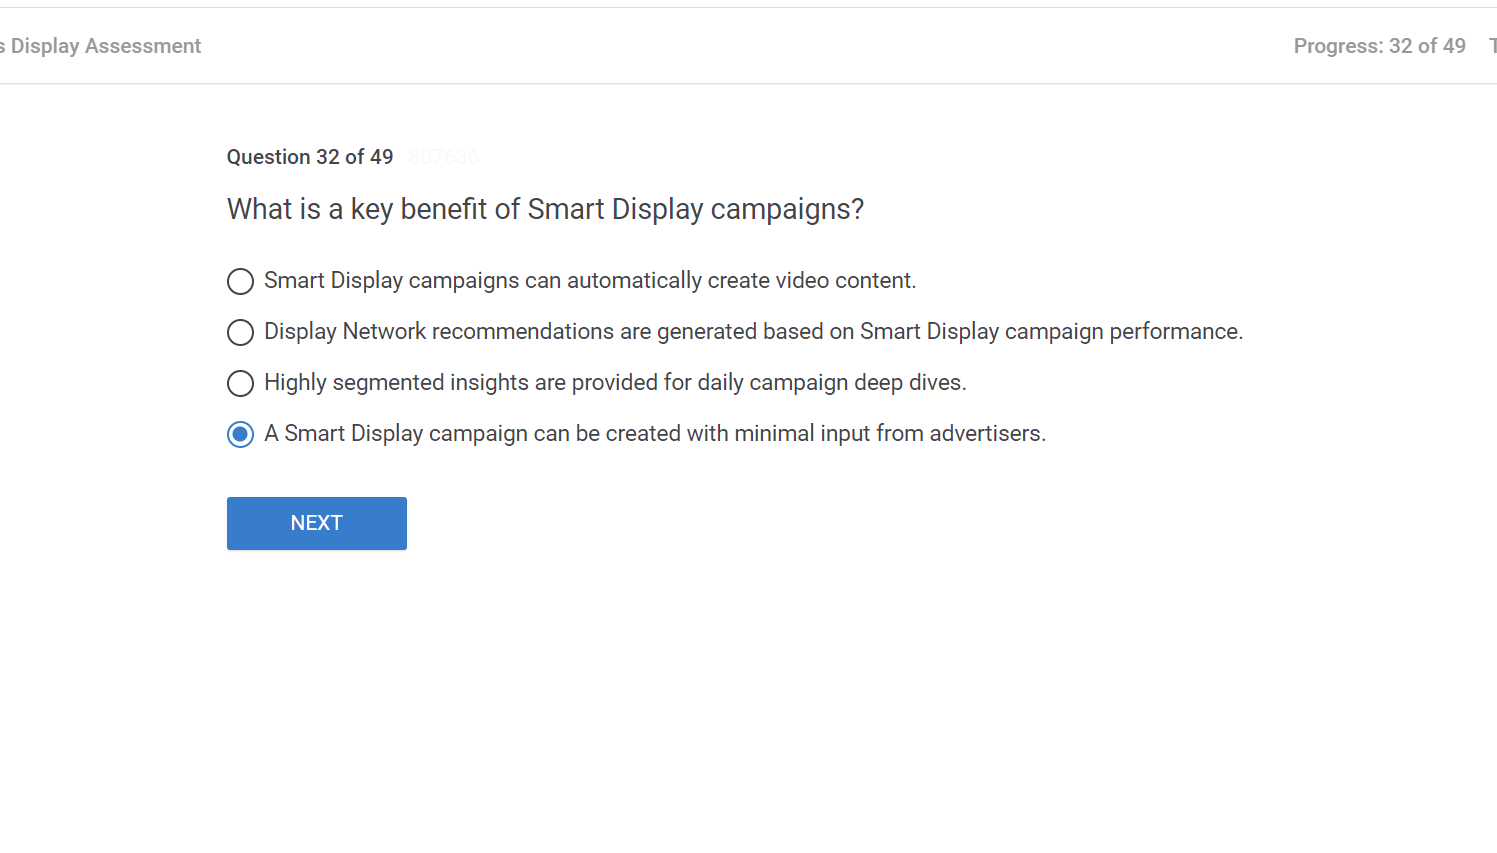 What is a key benefit of Smart Display campaigns